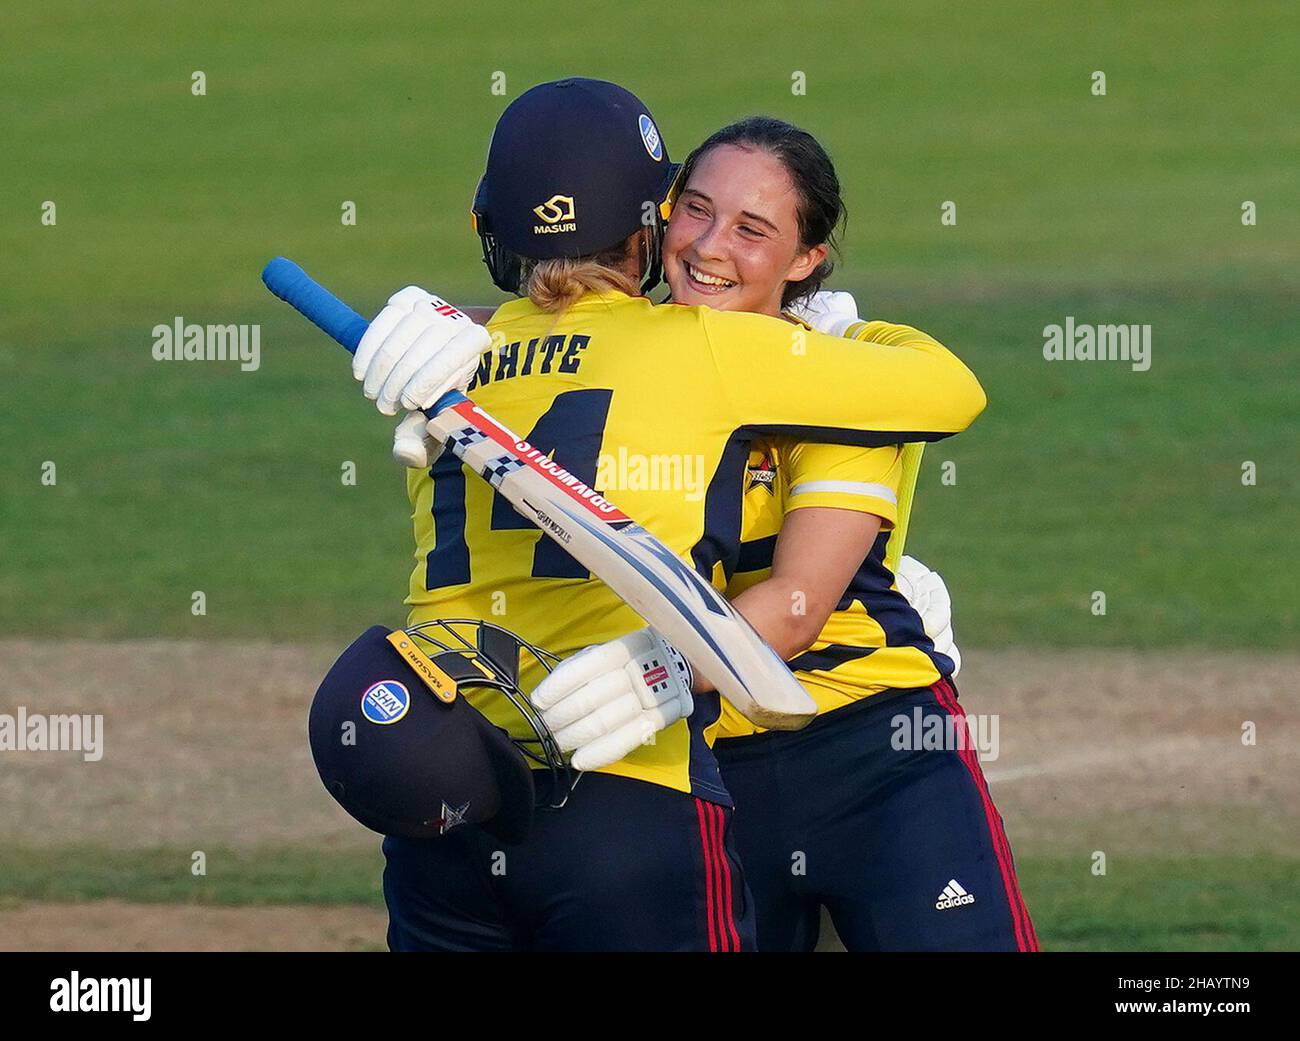 File photo dated 04-09-2021 of South East Stars Alice Capsey (right). The Surrey 17-year-old starred in the inaugural Hundred tournament in 2020 and was crowned the PCA’s Women’s Young Player of the Year. Having been granted her first professional contract, Capsey will be targeting more headline-grabbing antics in the Hundred, as well as cementing her status as one of her country’s brightest prospects. Issue date: Thursday December 16, 2021. Stock Photo